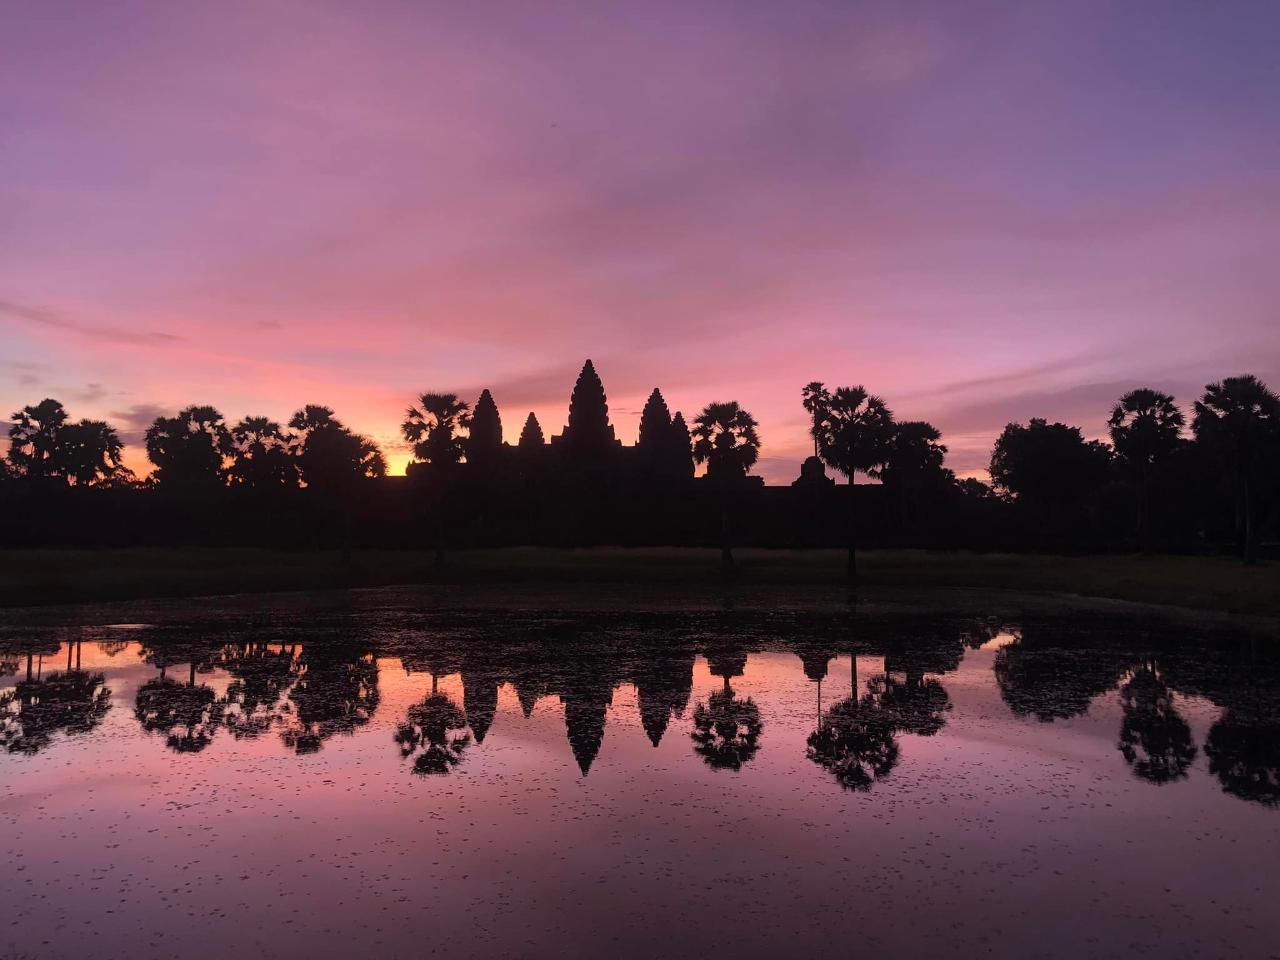 Angkor Wat: Highlights and Sunrise Guided Tour